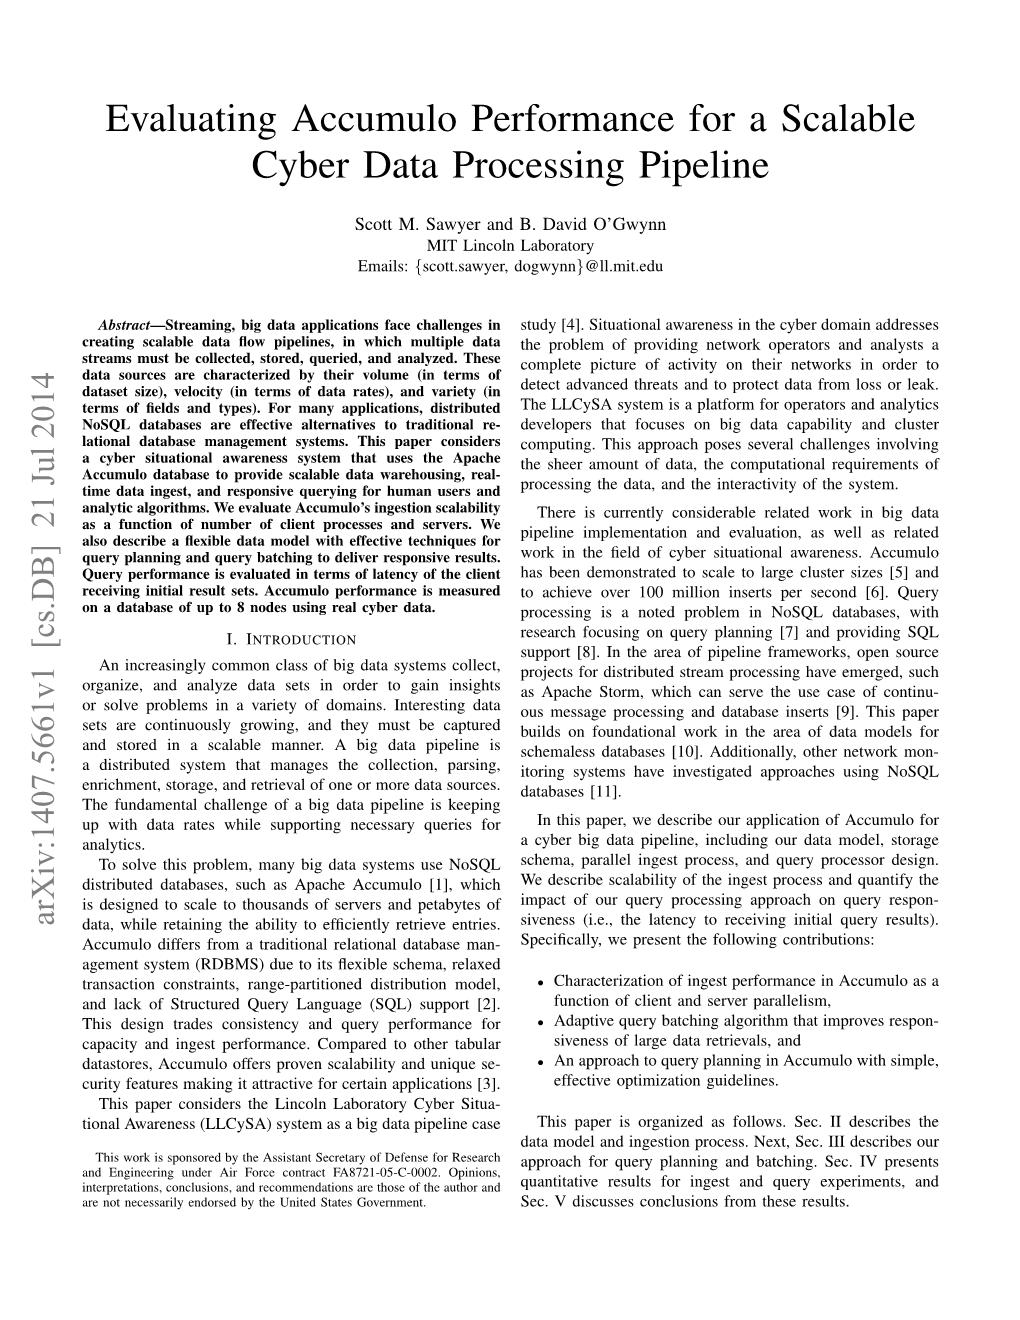 Evaluating Accumulo Performance for a Scalable Cyber Data Processing Pipeline